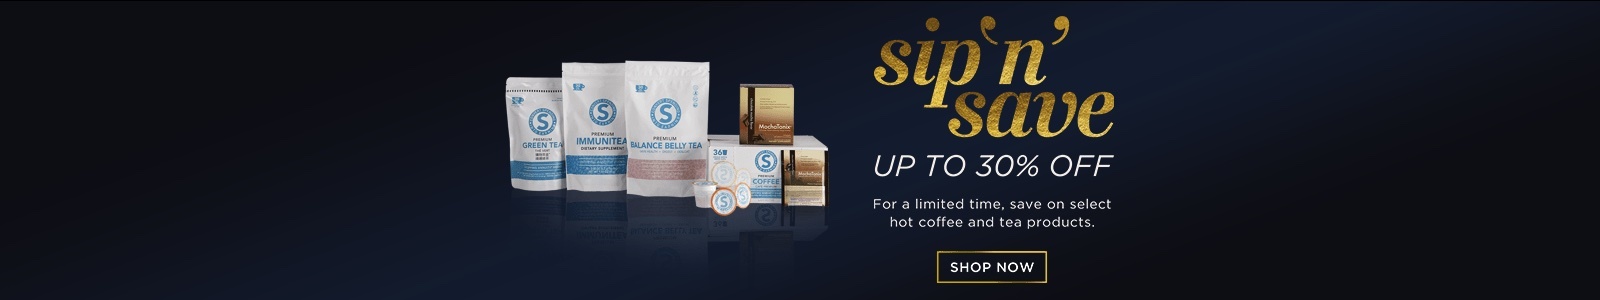 Sip 'n' Save (up to 30% off!) For a limited time, save on select hot coffee and tea products. SHOP NOW